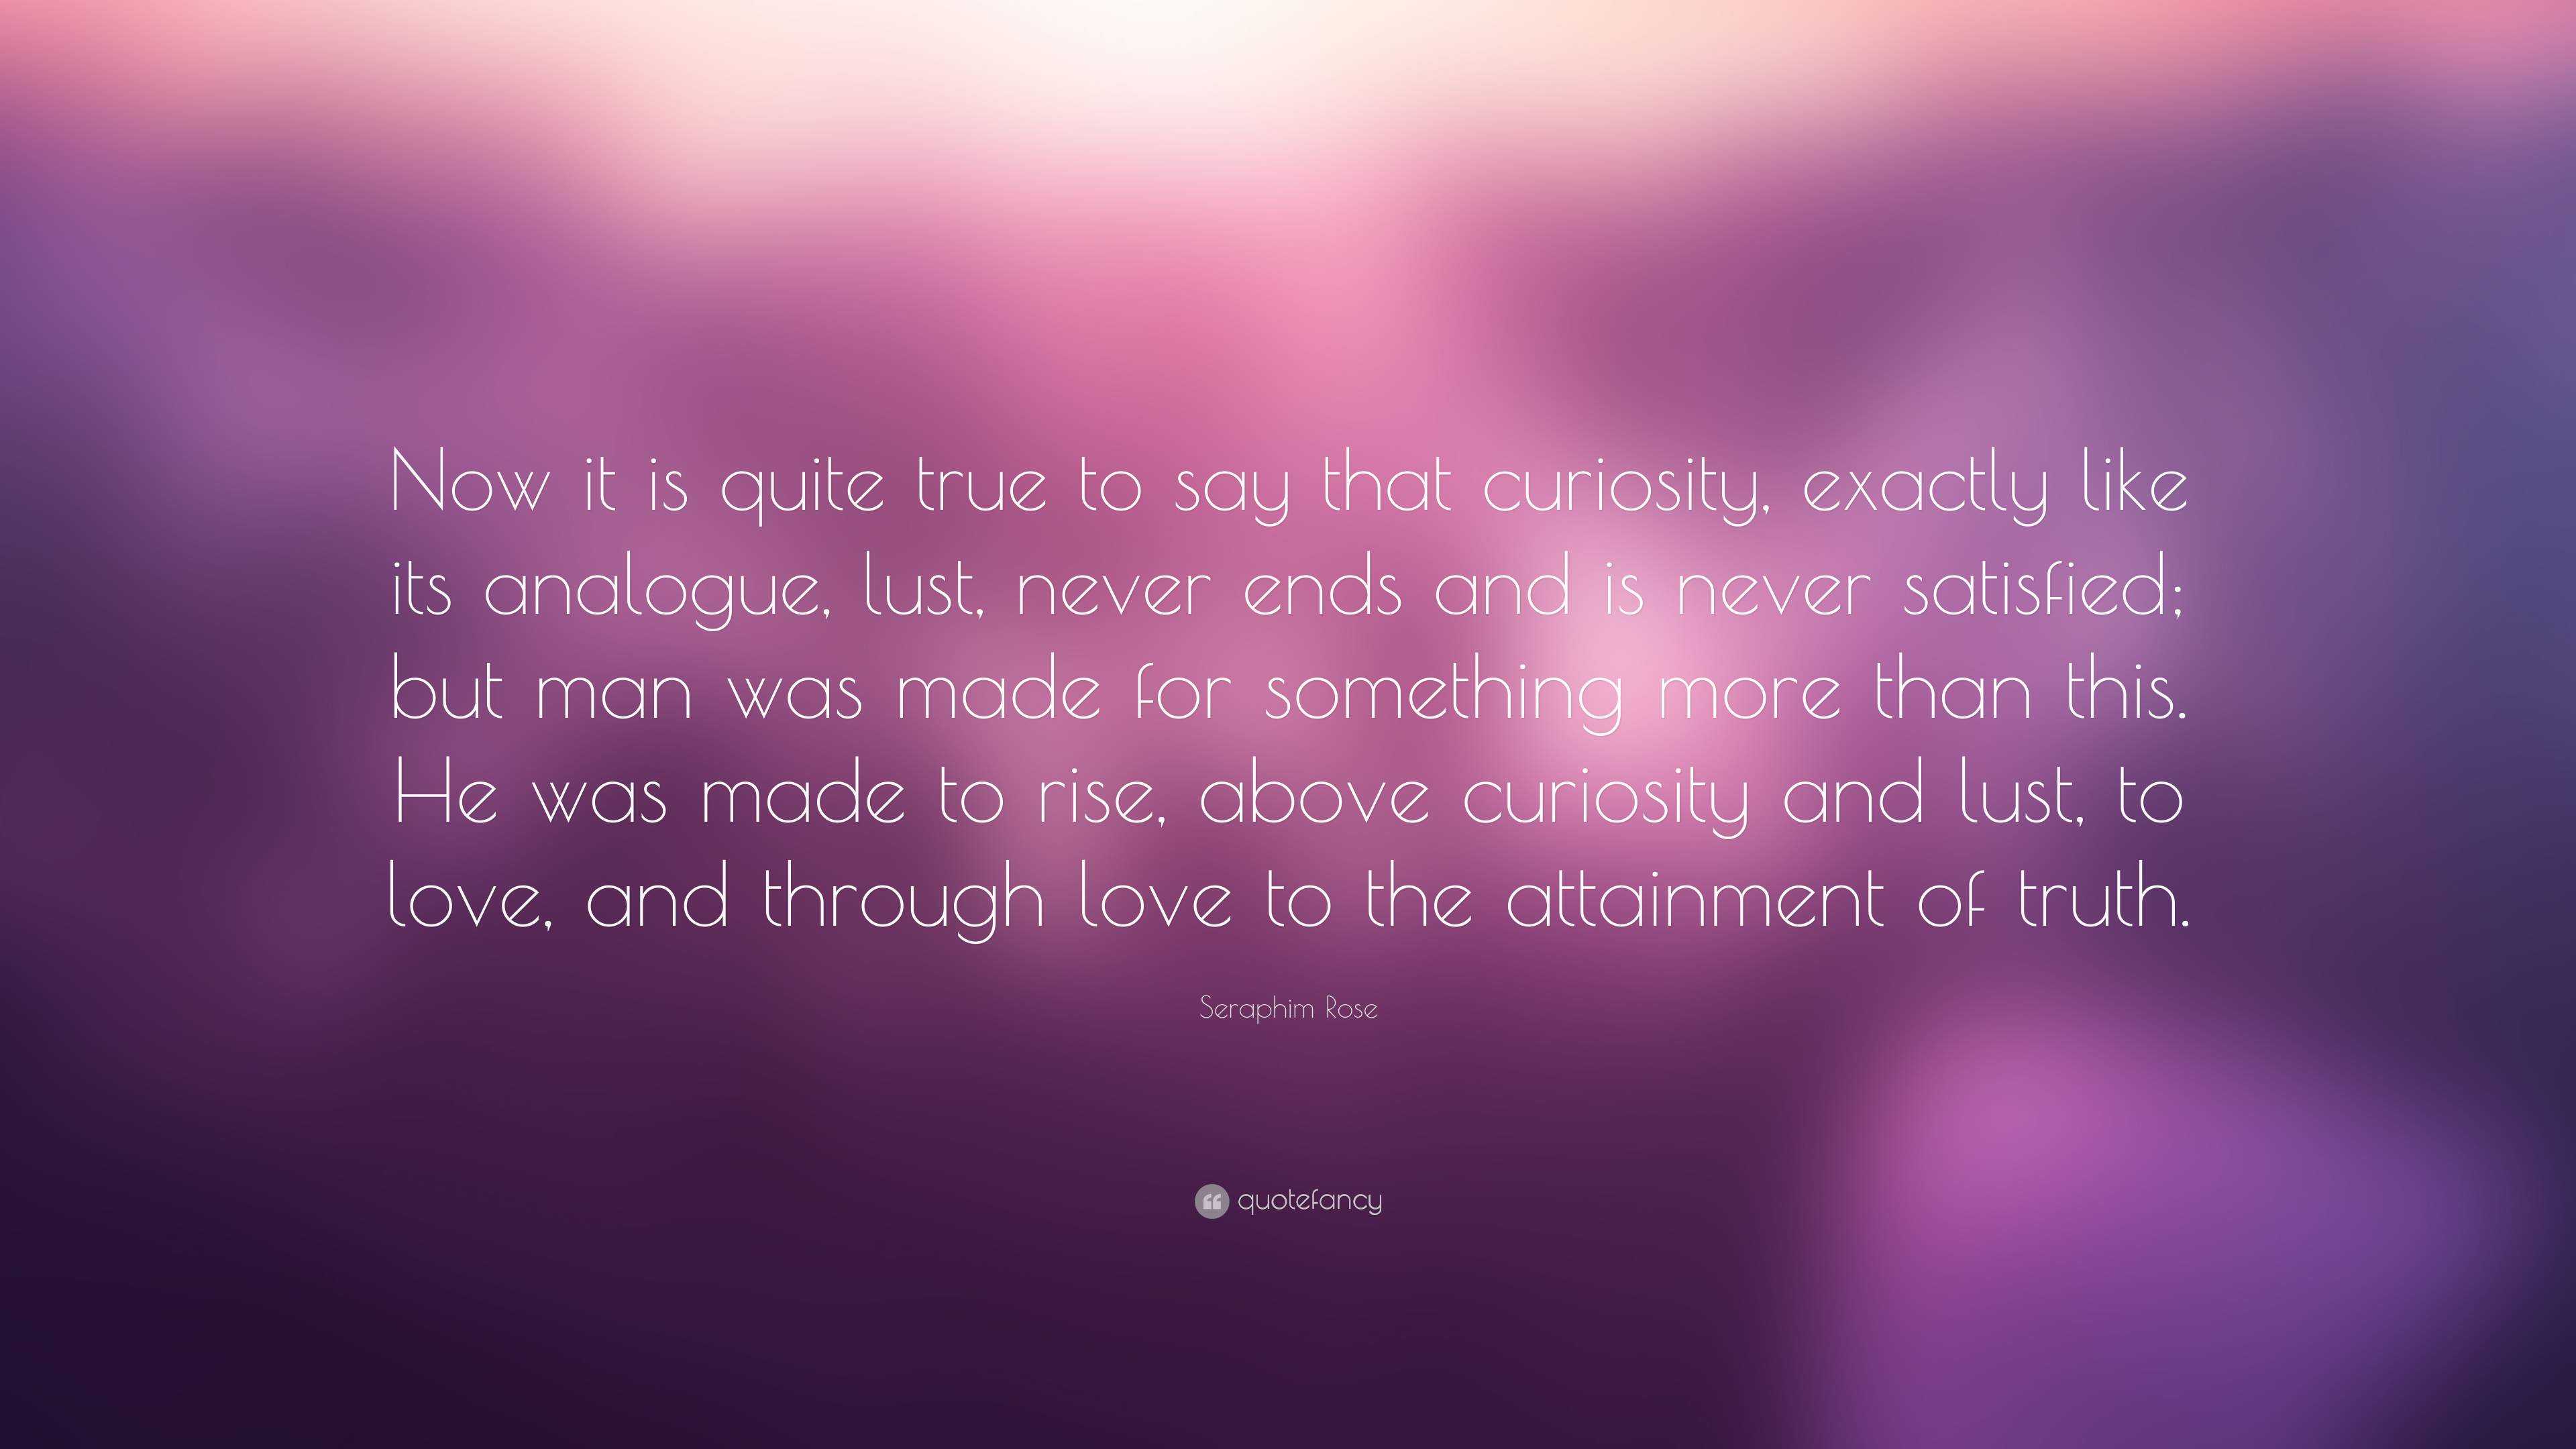 Seraphim Rose Quote: “Now it is quite true to say that curiosity ...